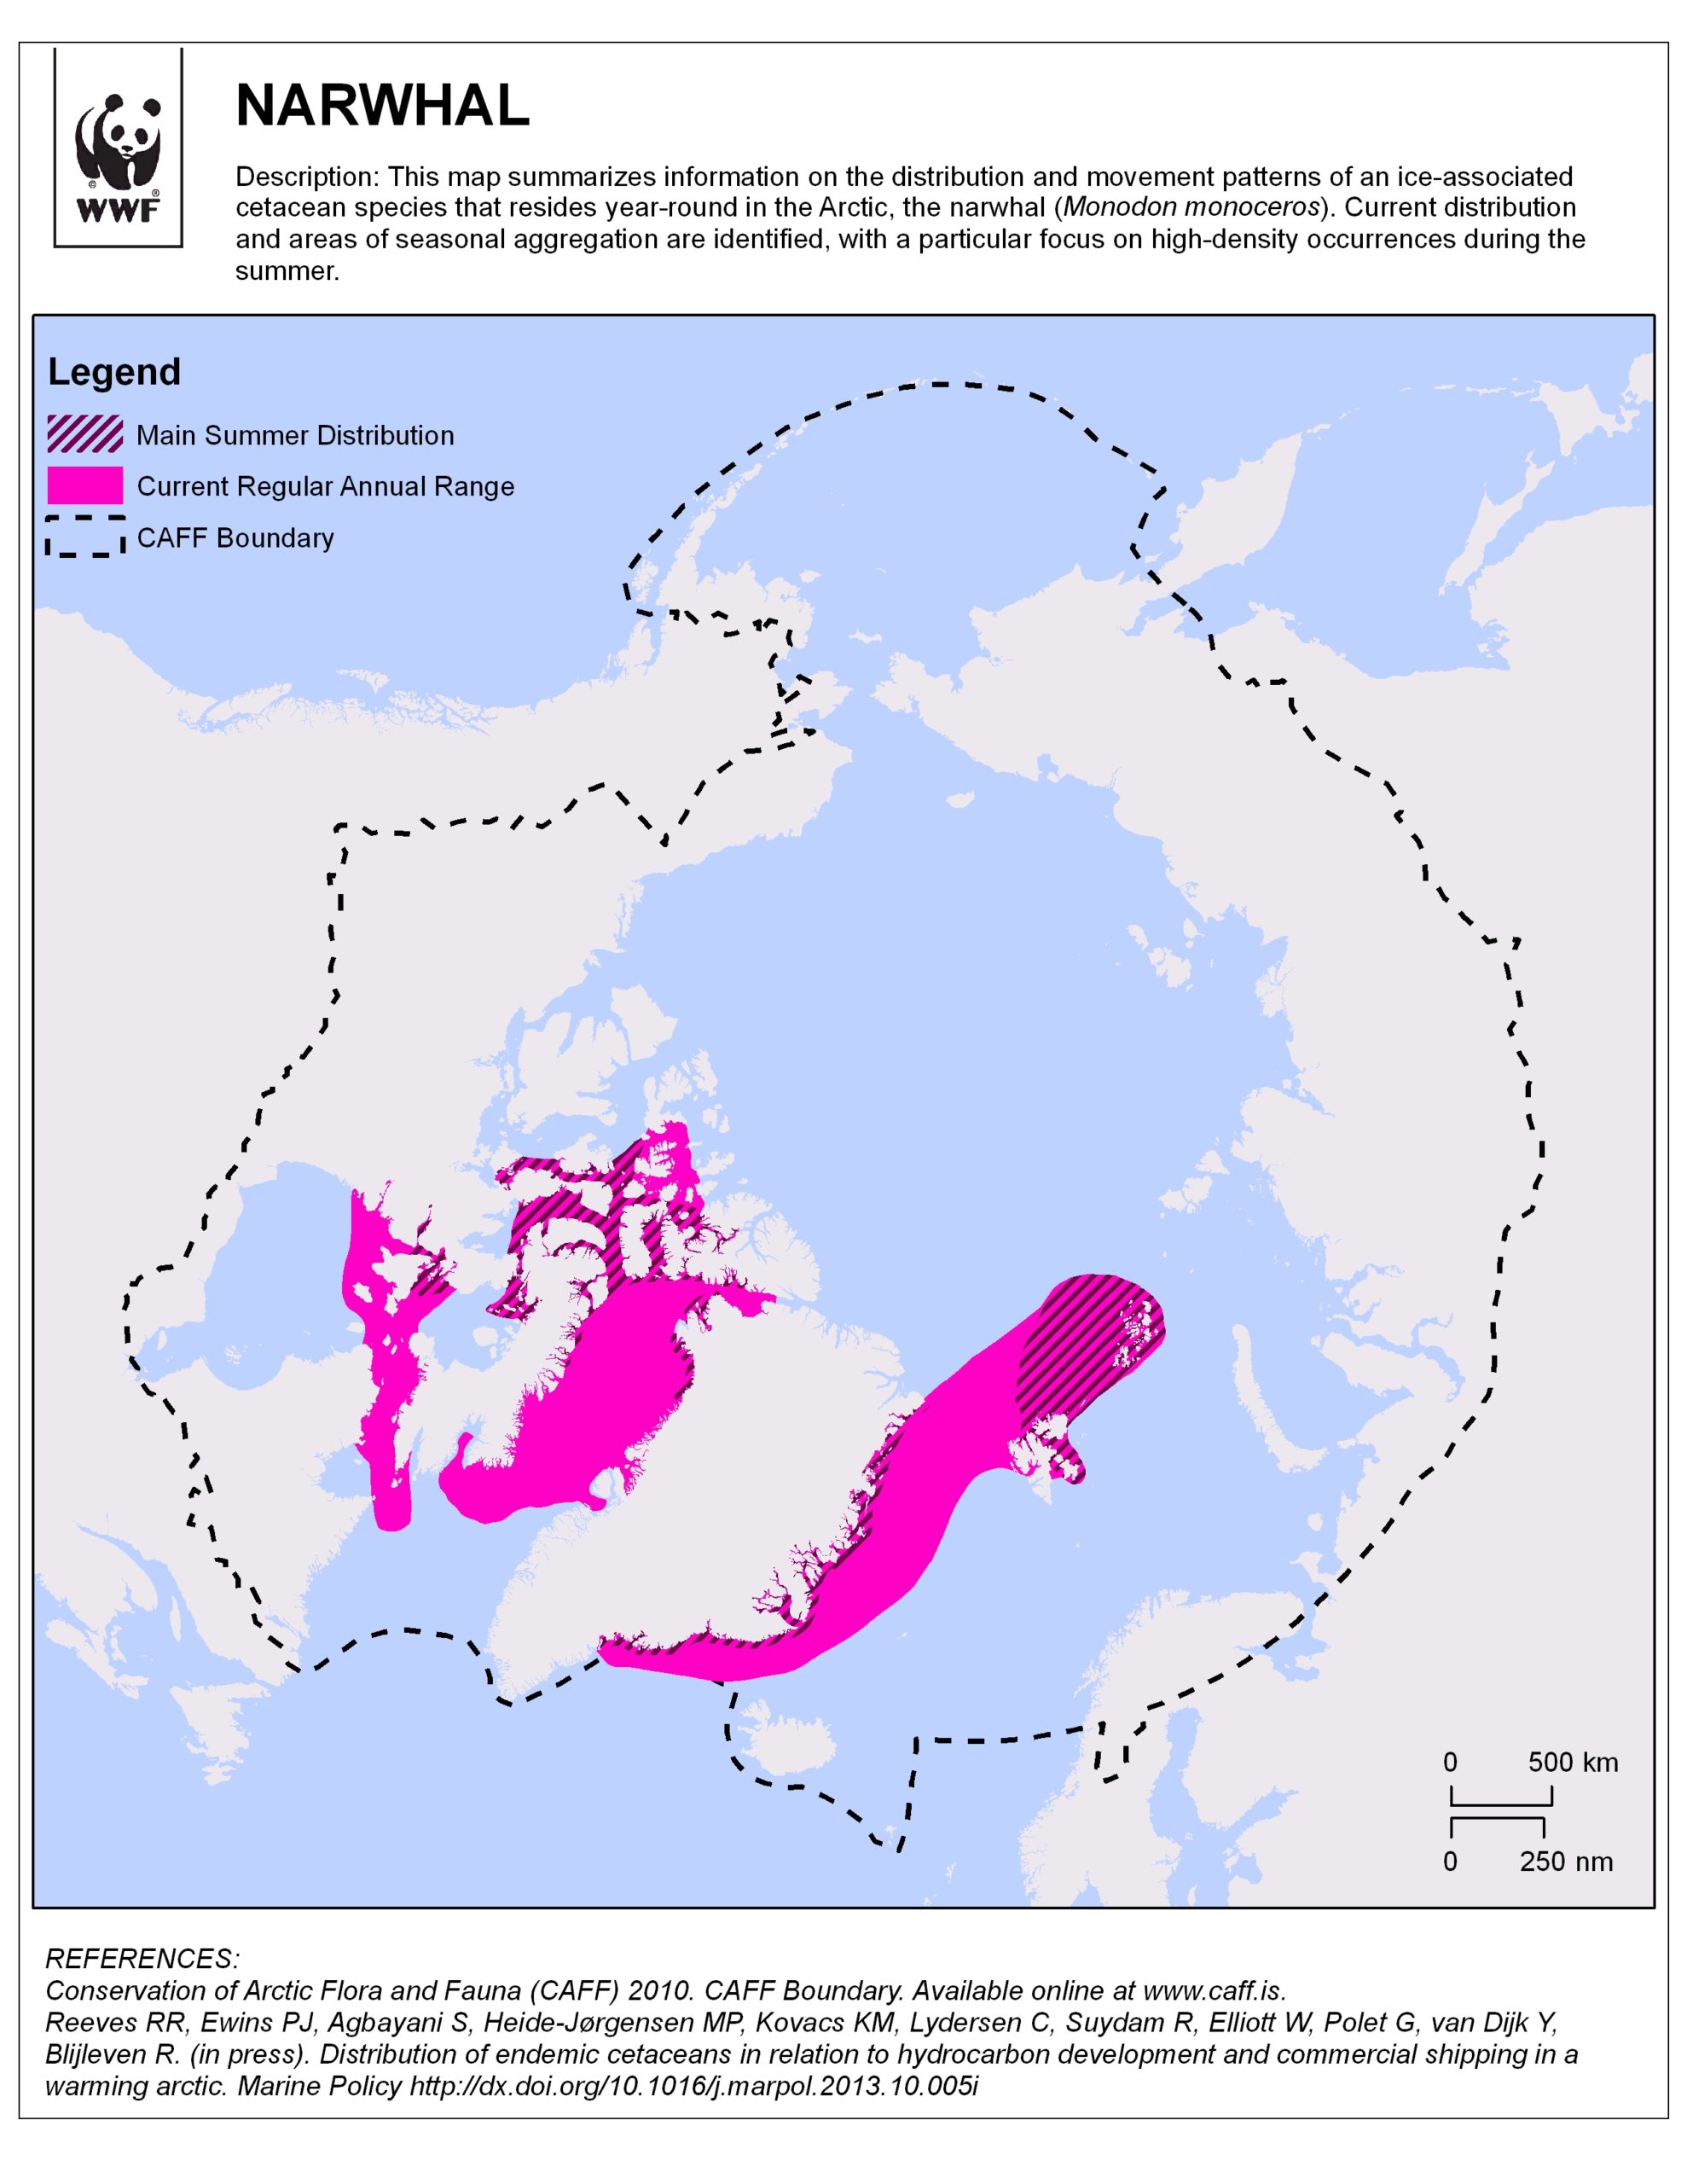 Narwhal movement and distribution patterns in the Arctic